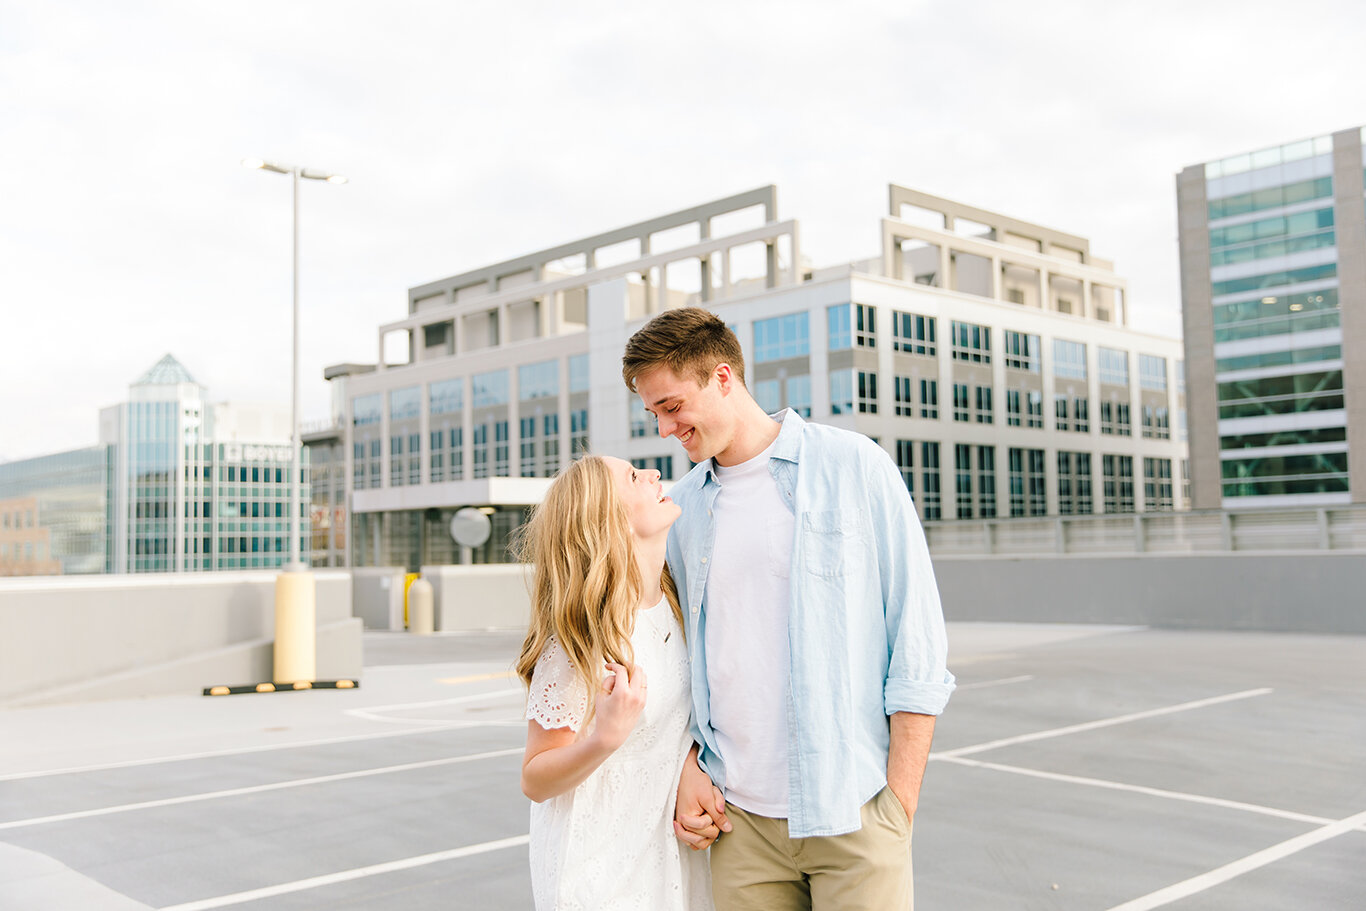  side by side loose hanging curls light blue collared casual shirt white lace short sleeve dress downtown city buildings cityscape city creek mall harmon’s building salt lake city utah professional utah valley engagement photographer #downtownsaltlak